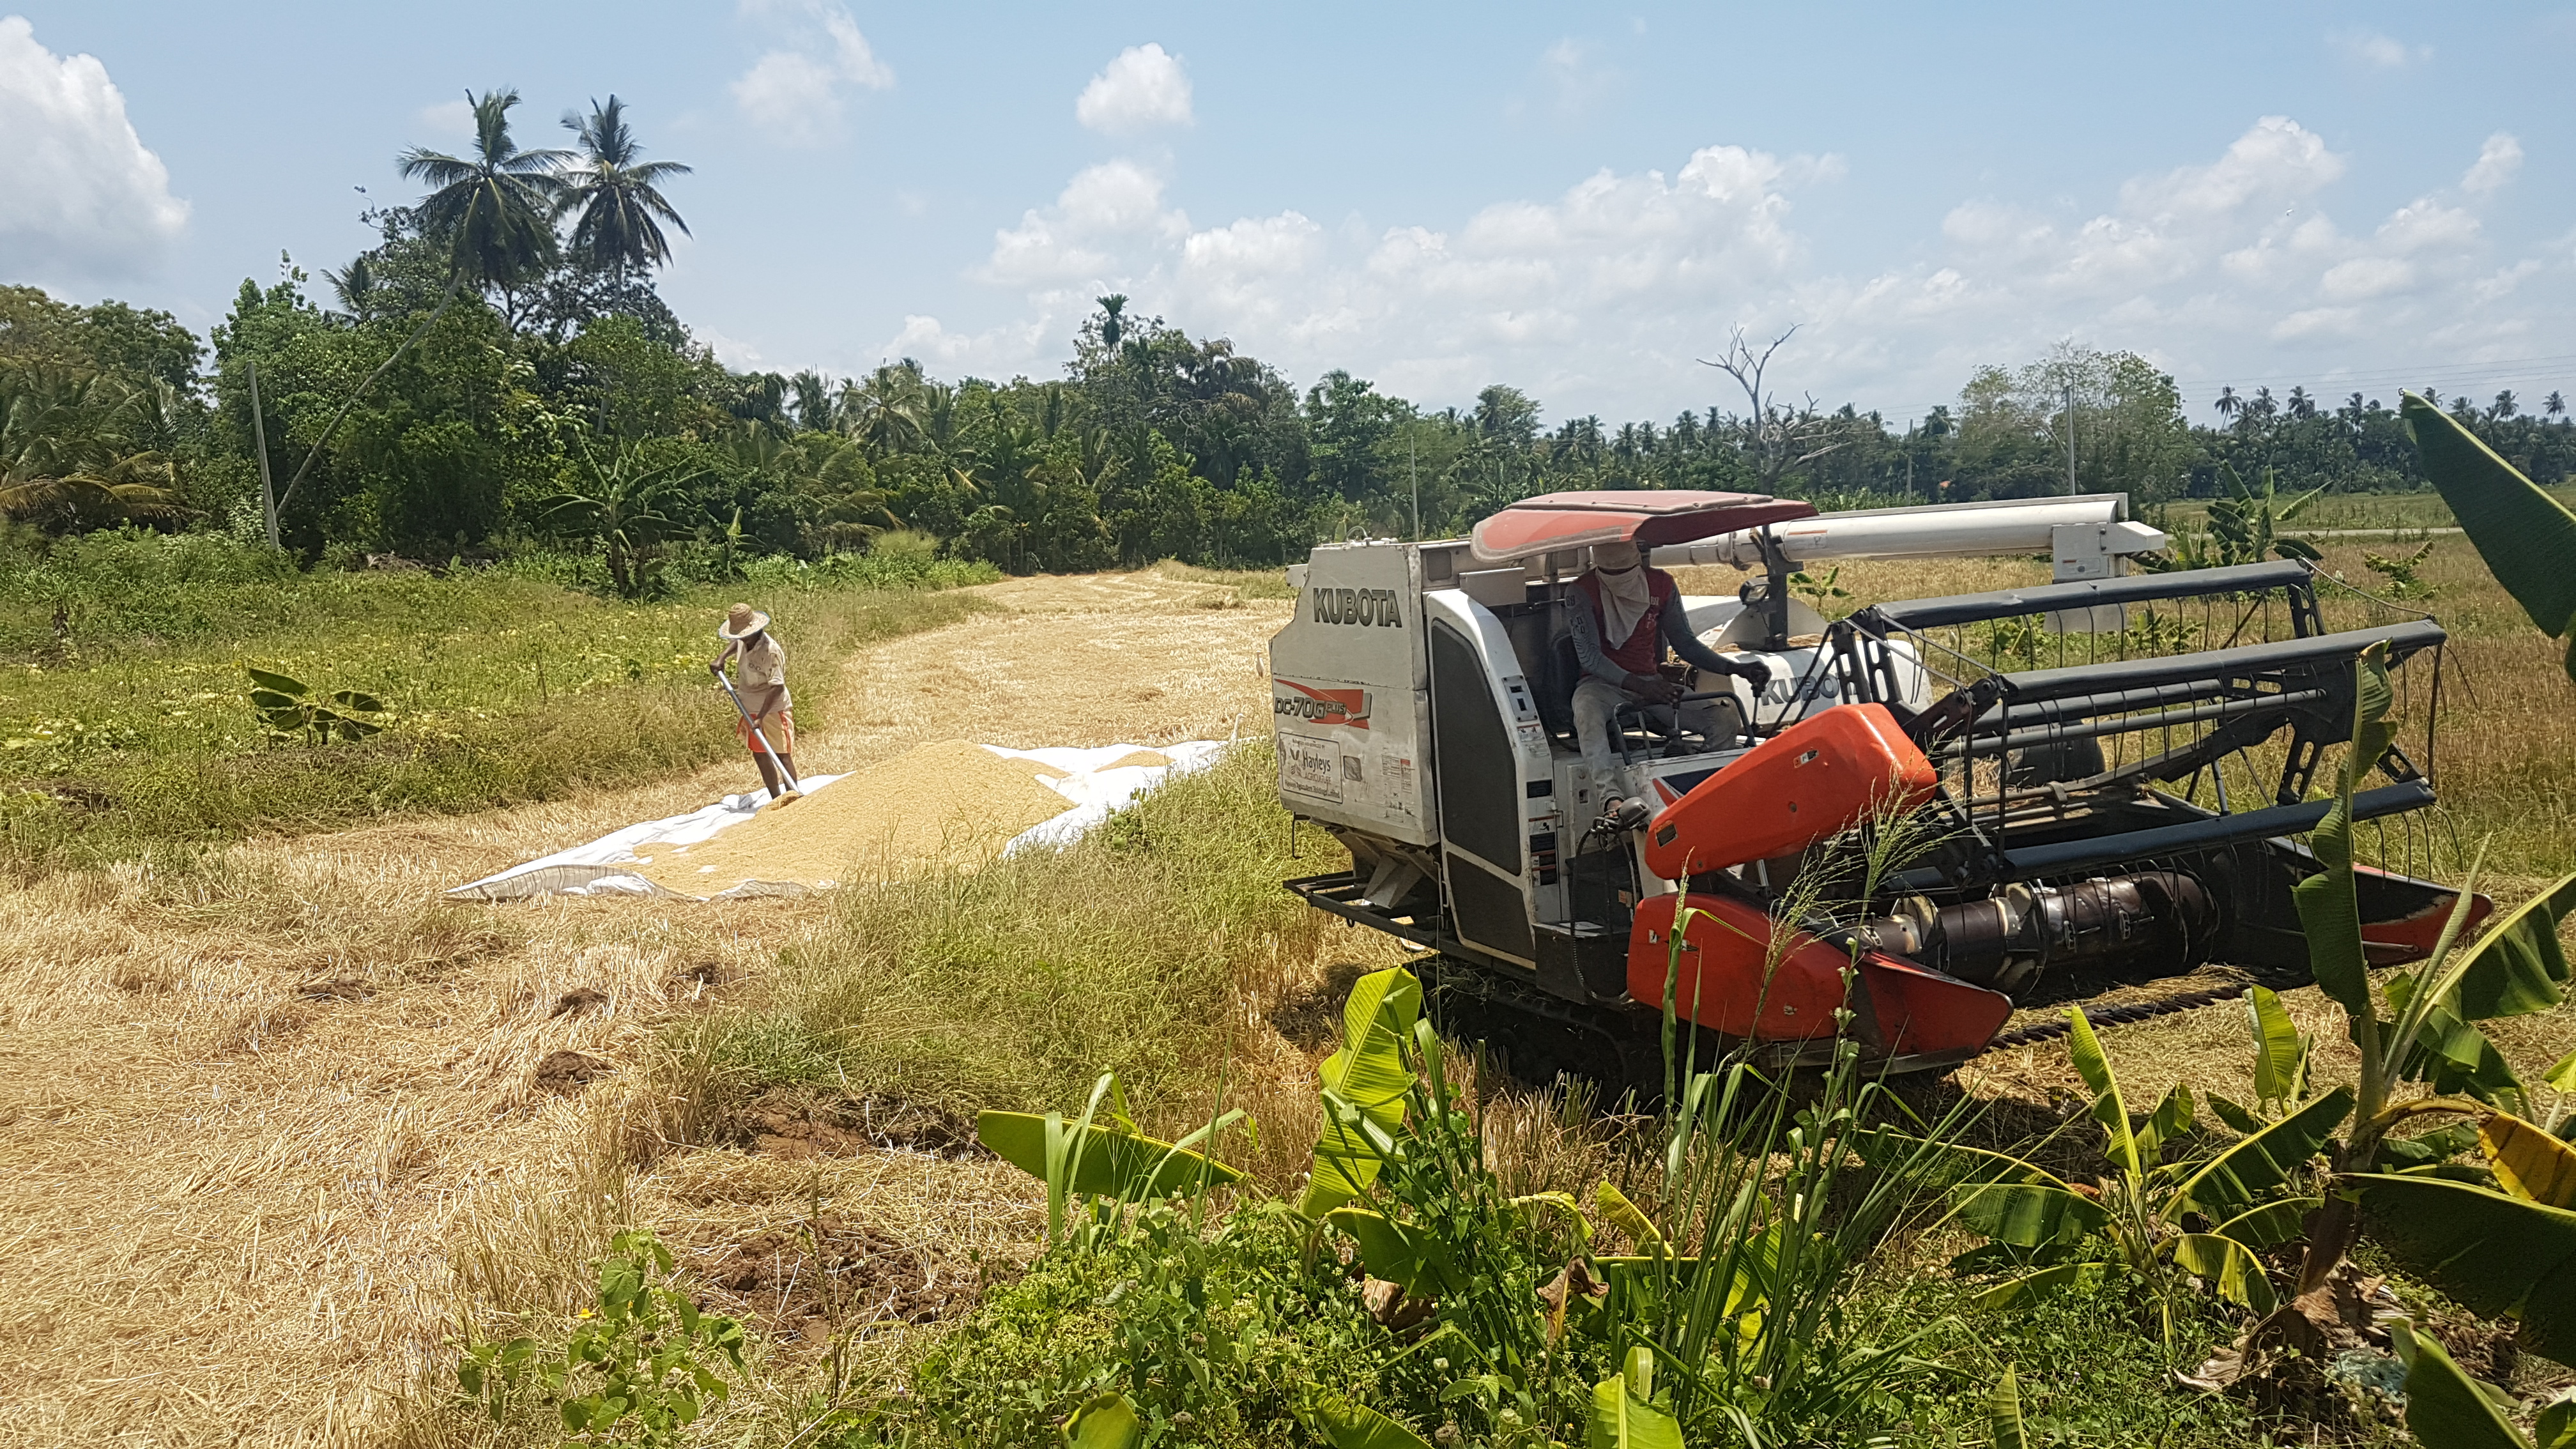 “The paddy in this field is close to over-ripe. A few more days and it won’t be usable. The harvest got delayed because there was no diesel to operate this machine.”